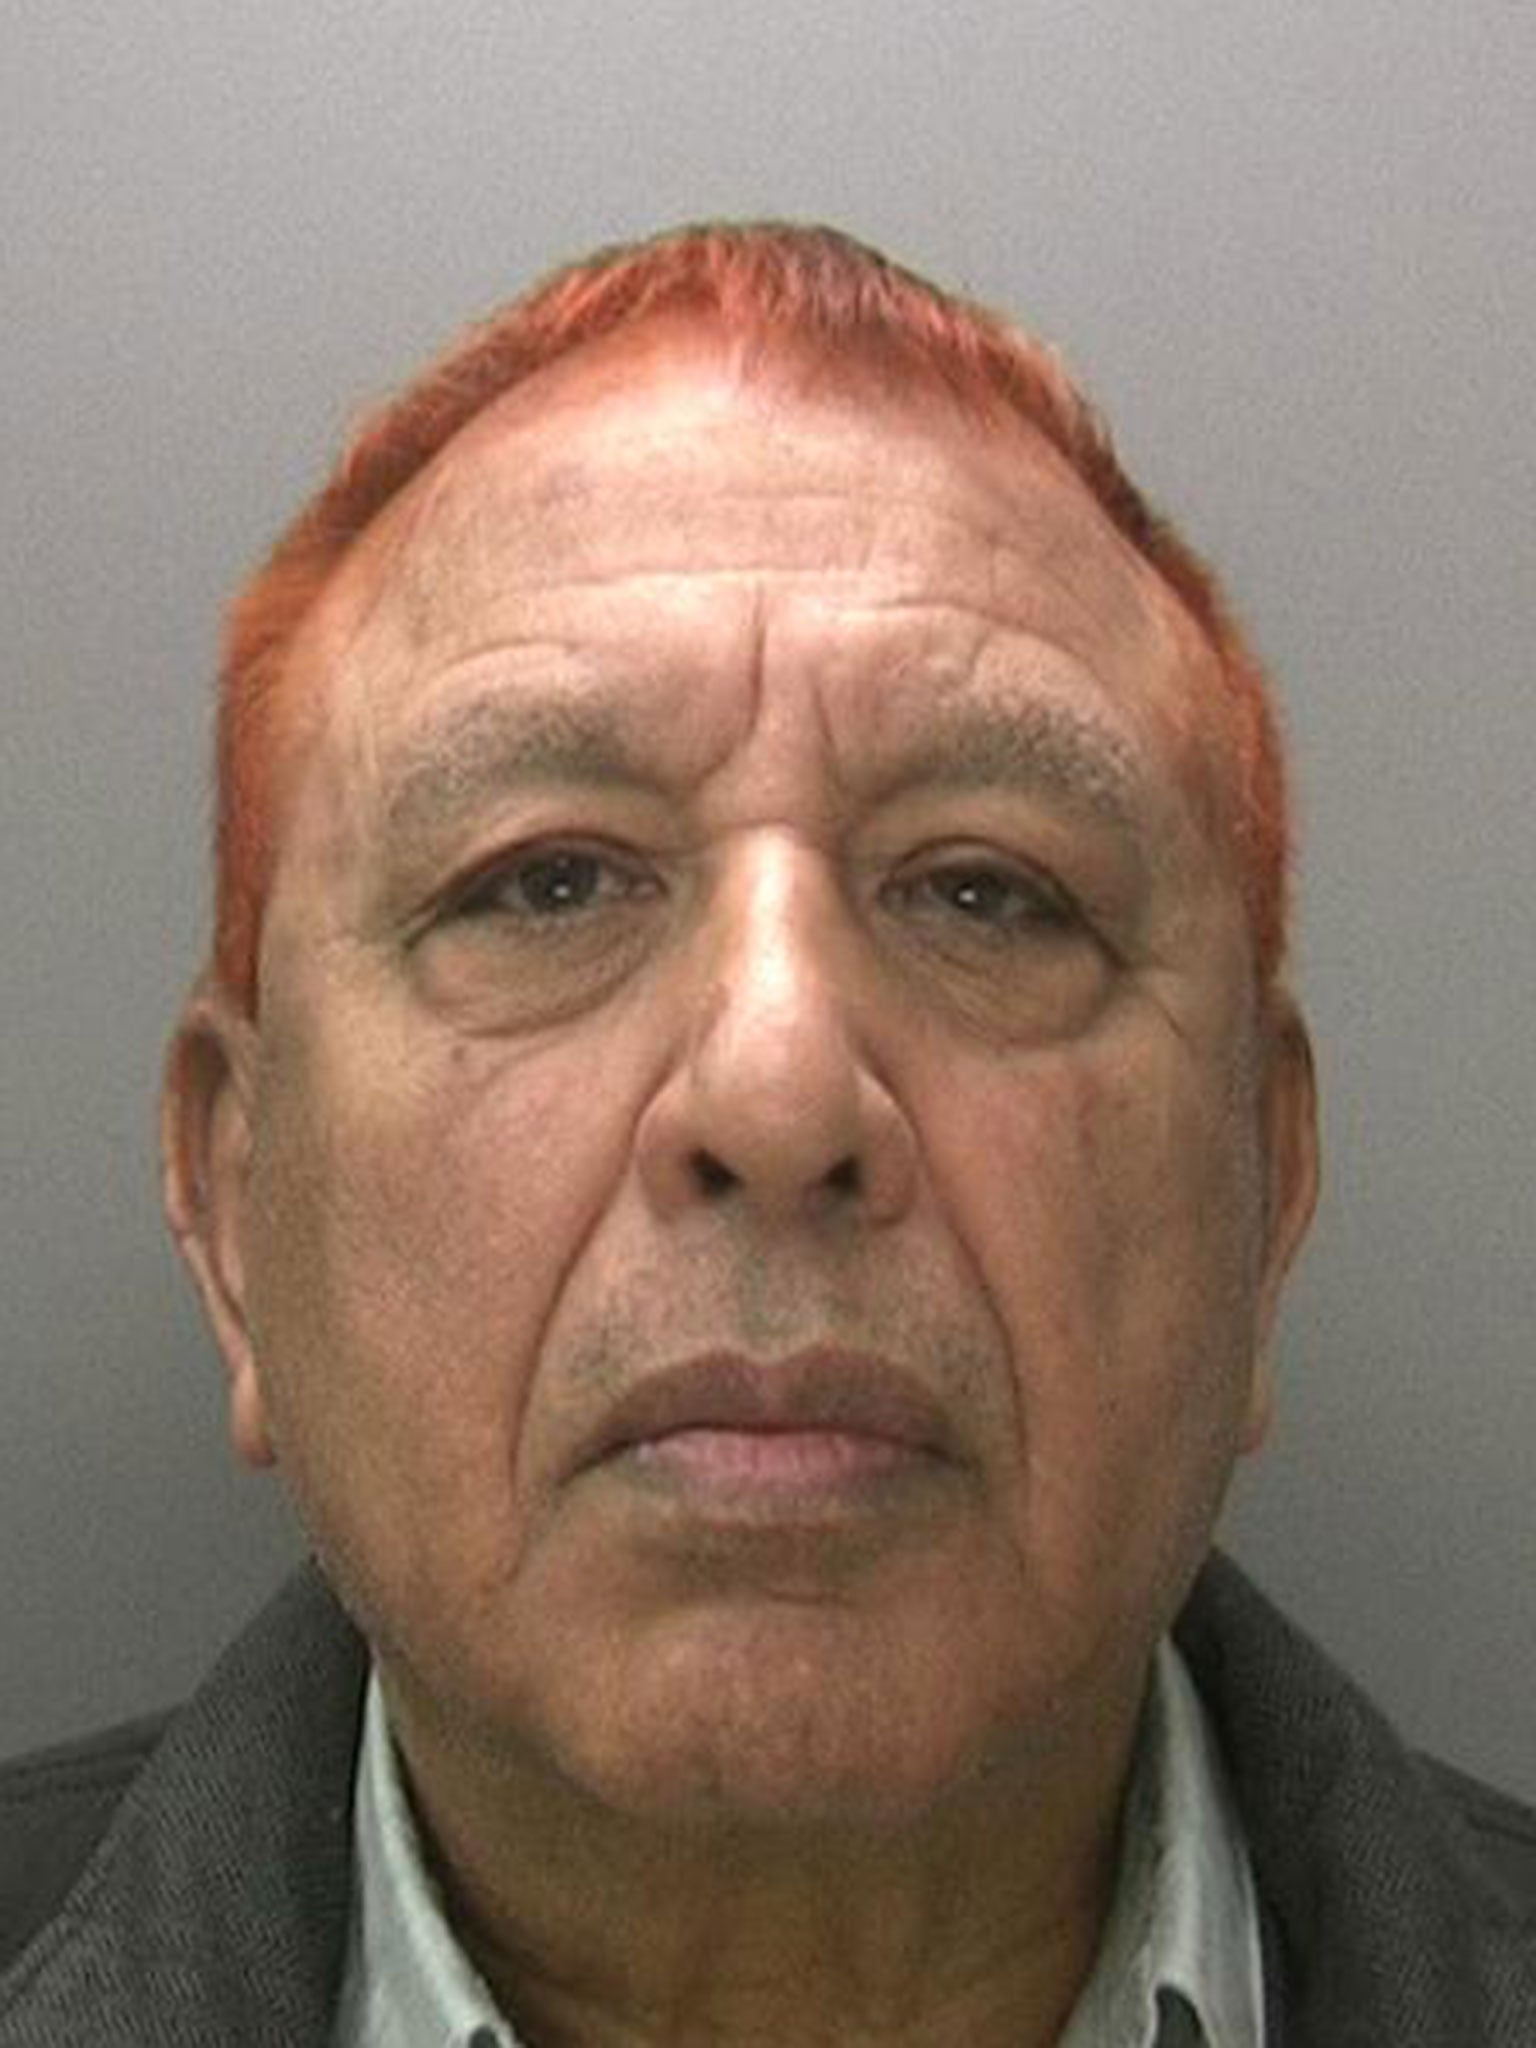 Mohammed Rafiq, 80, was convicted of causing grievous bodily harm to 19-year-old Vikki Horsman